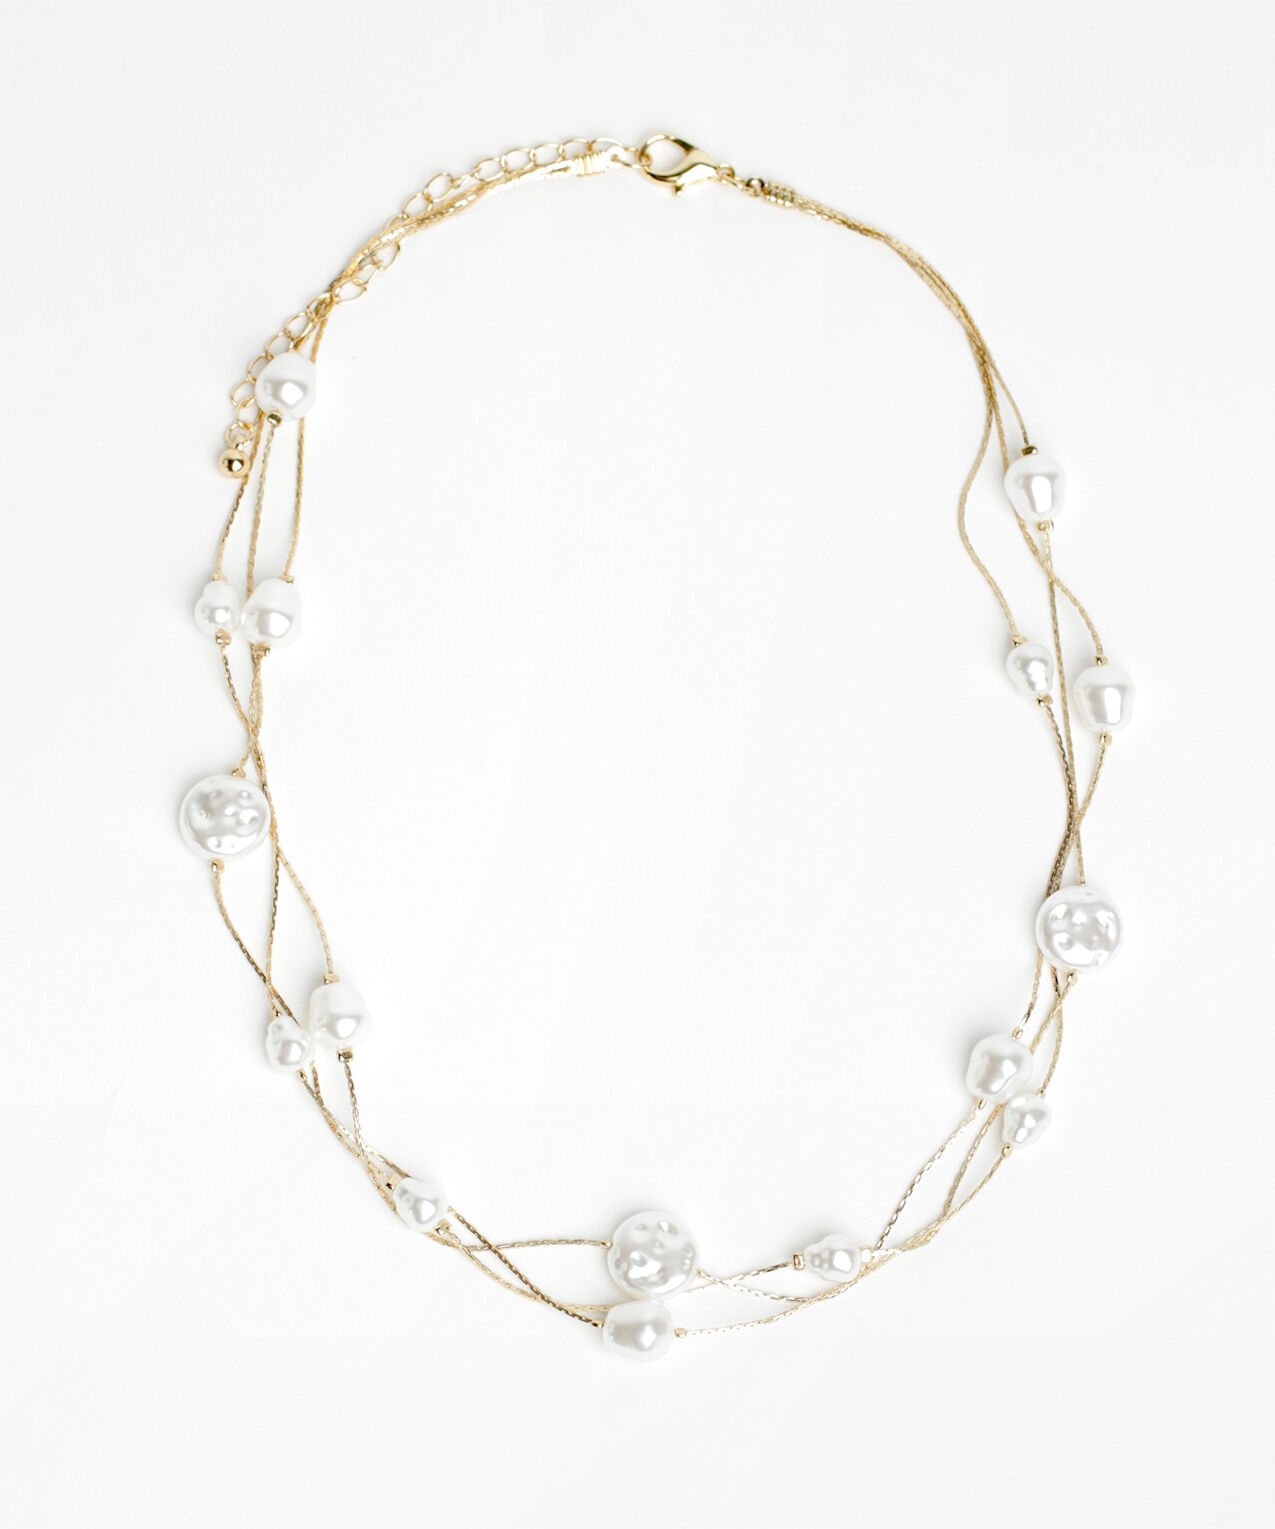 Short 3-Tier Gold Necklace with Pearls